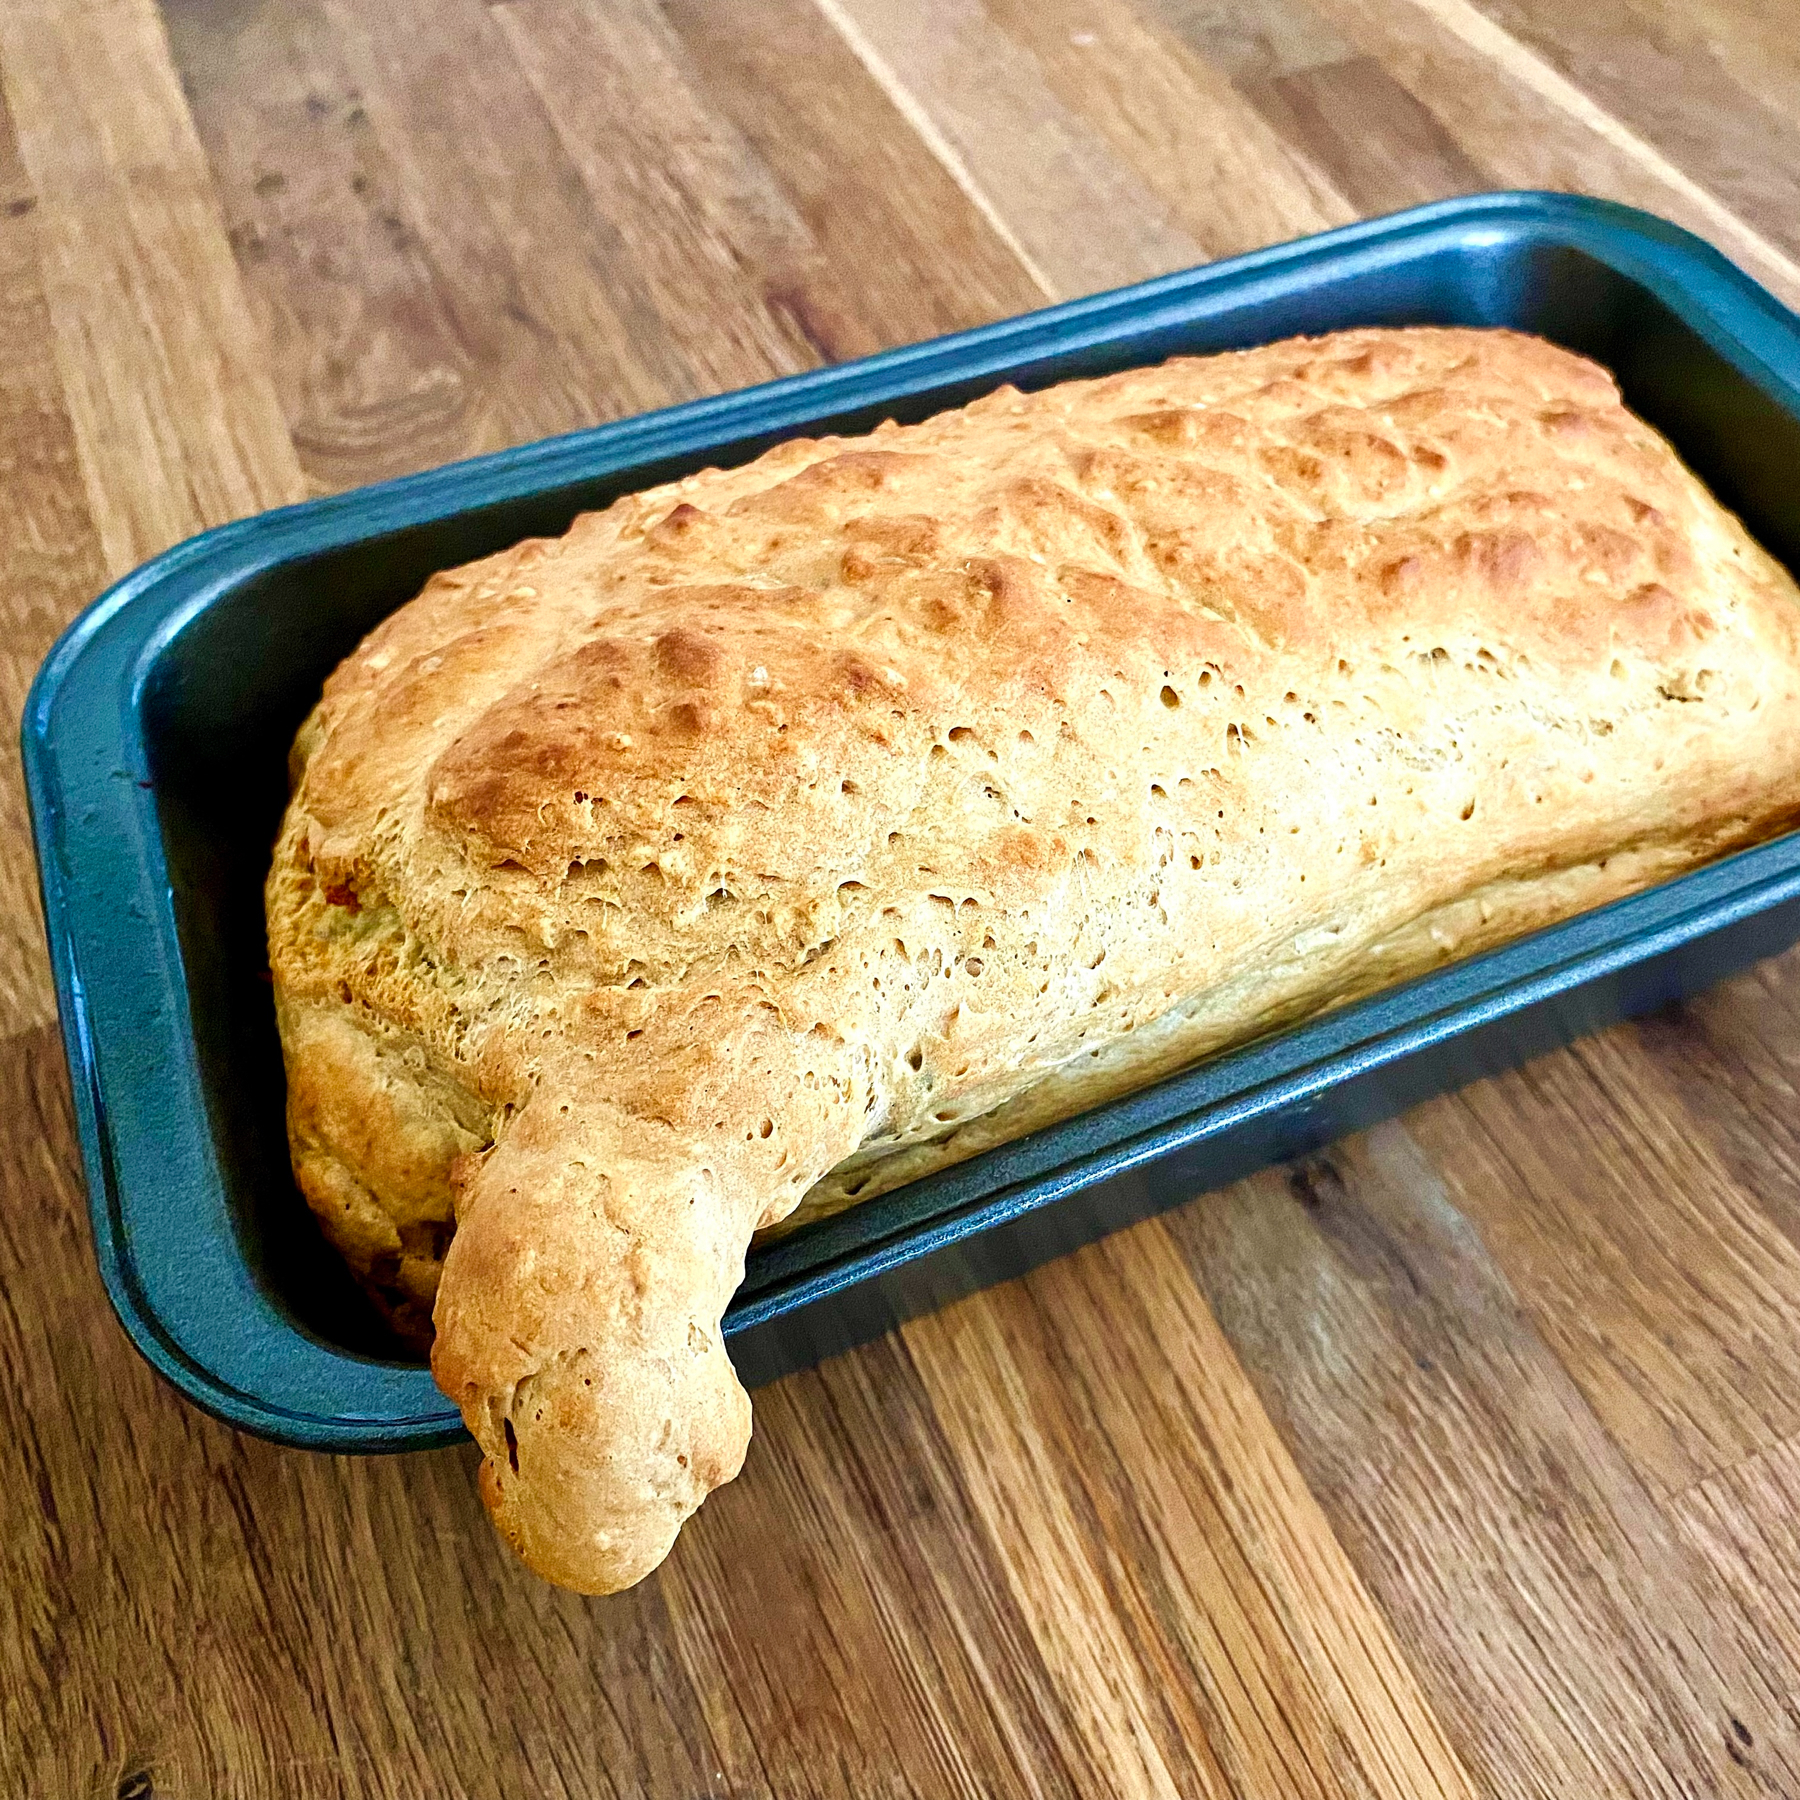 A loaf of bread in a metal baking pan on a wooden surface. One corner of the loaf has risen over the corner and out of the tin.